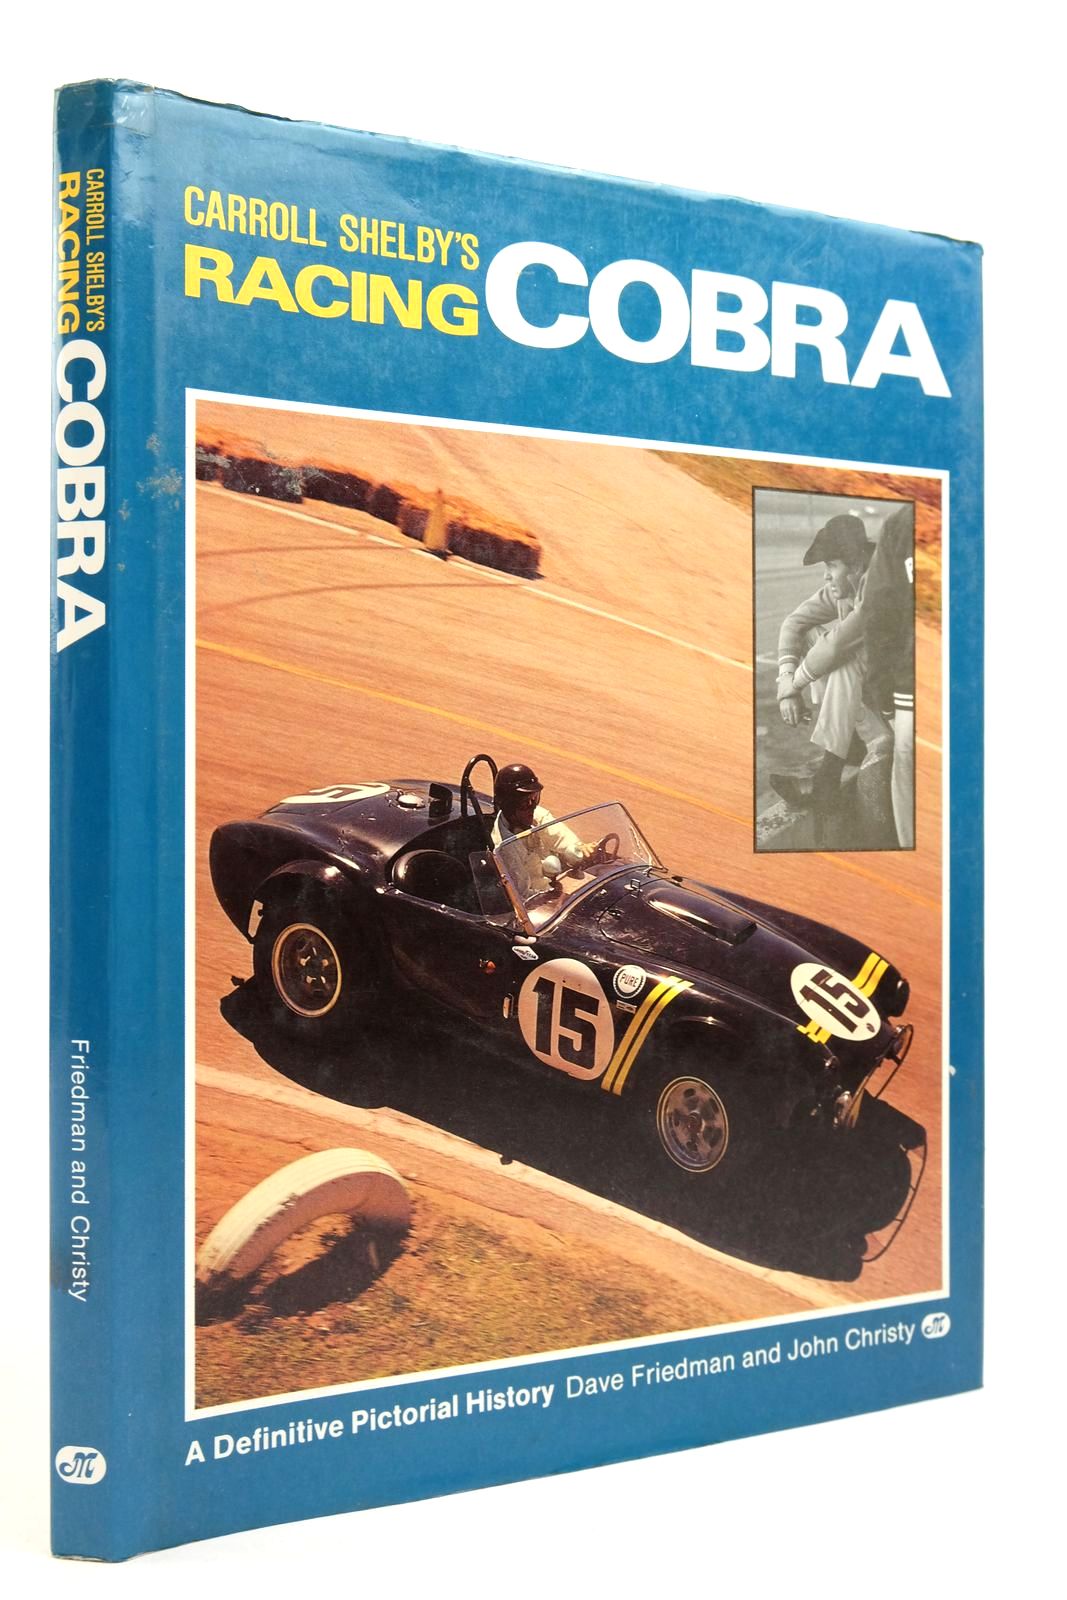 Photo of CARROLL SHELBY'S RACING COBRA written by Friedman, Dave Christy, John published by Motorbooks International (STOCK CODE: 2139261)  for sale by Stella & Rose's Books